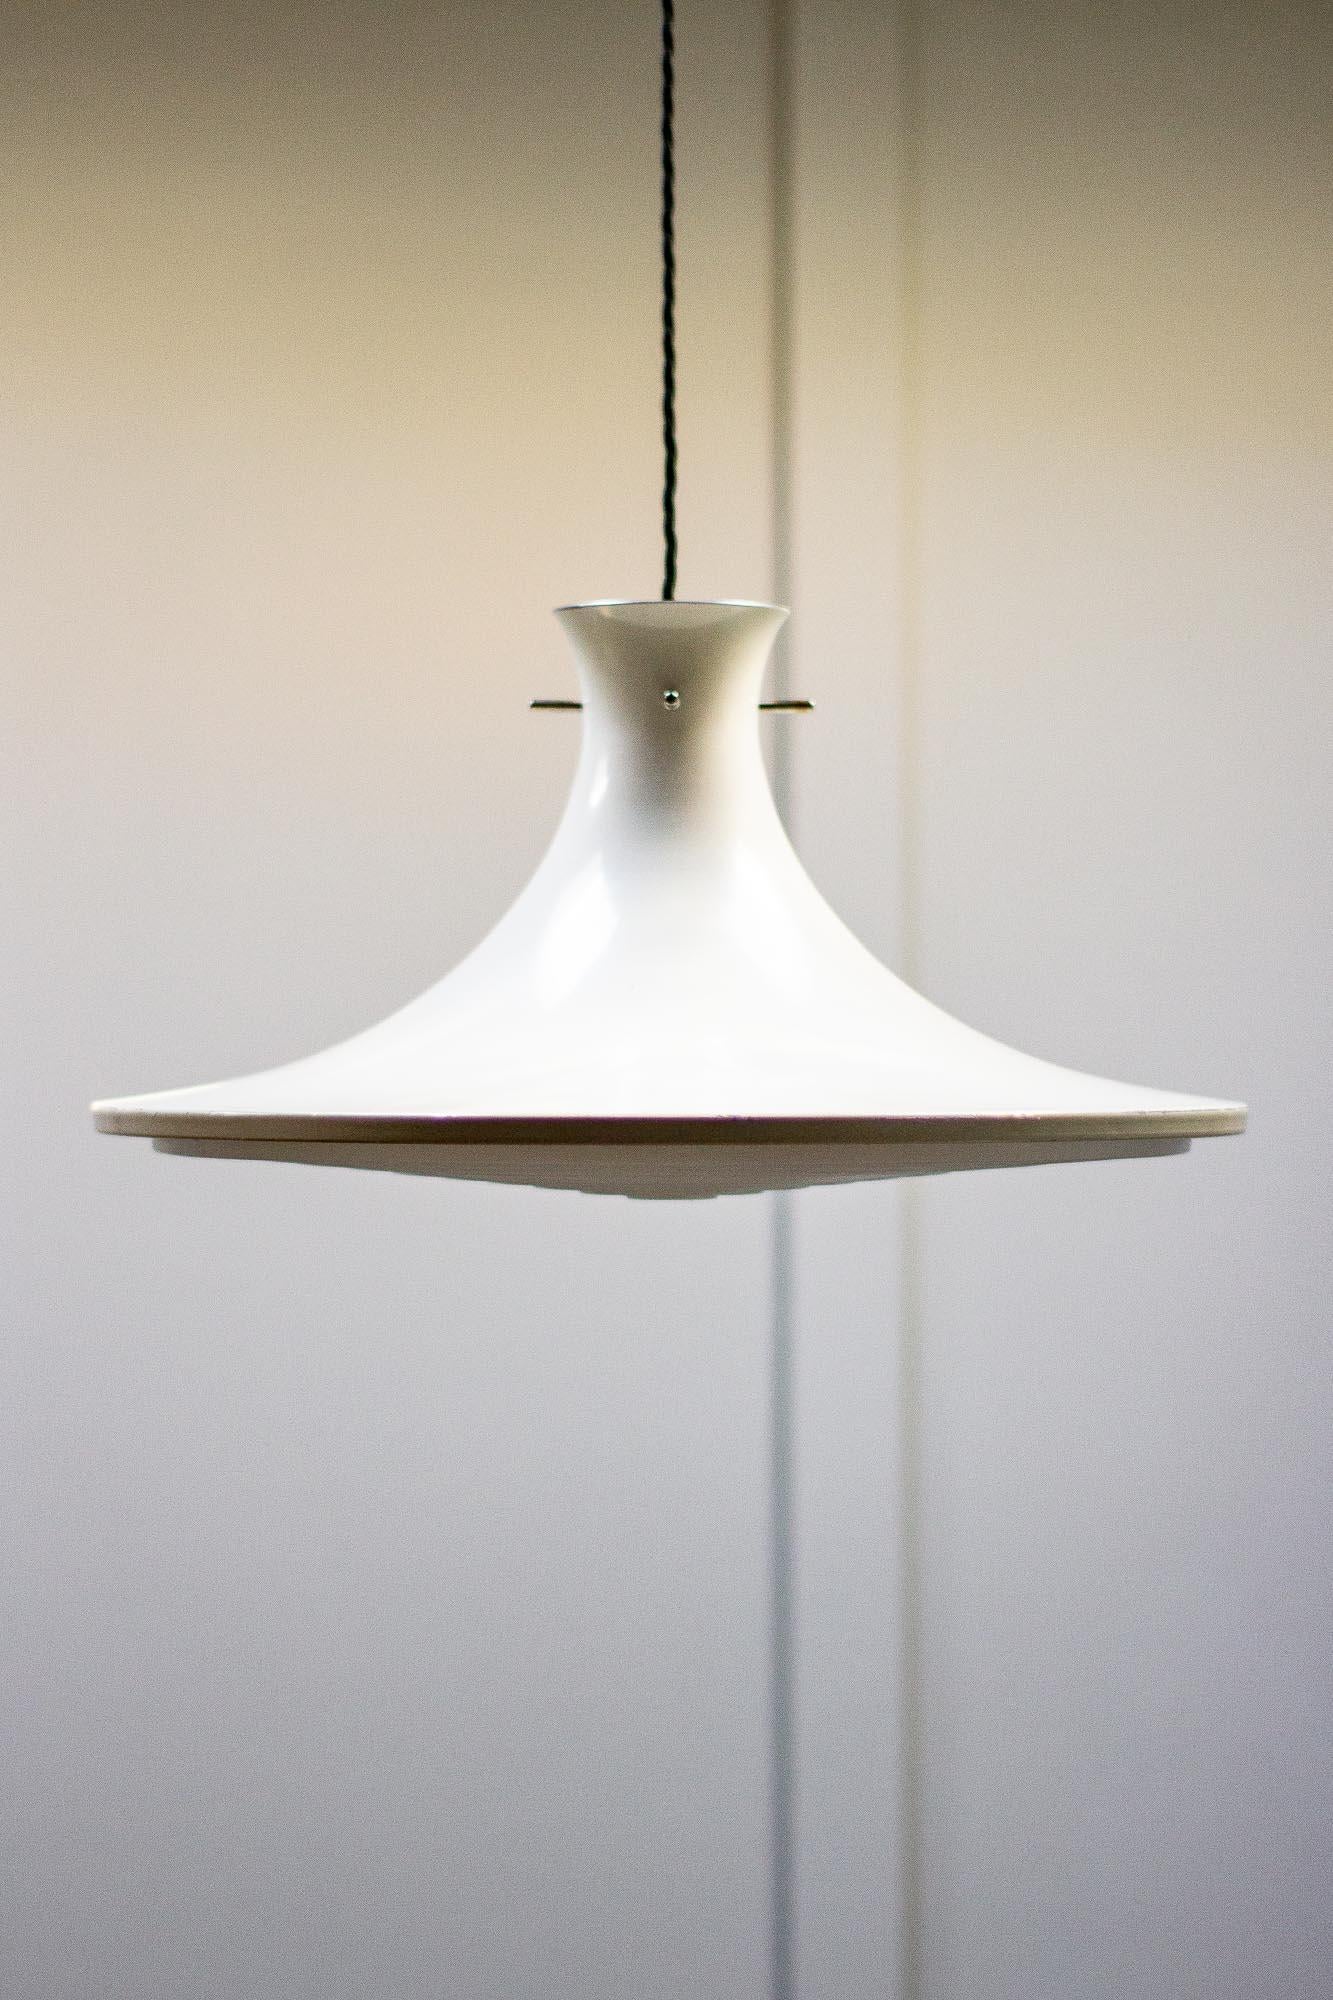 Ceiling light designed by Hans Agne Jakobsson for AB Markaryd.

This Swedish designer was well known for creating diffused muted lighting. Designed in the 1960s and has a metal shade and a plastic diffuser.

Theme is a small amount of paint loss